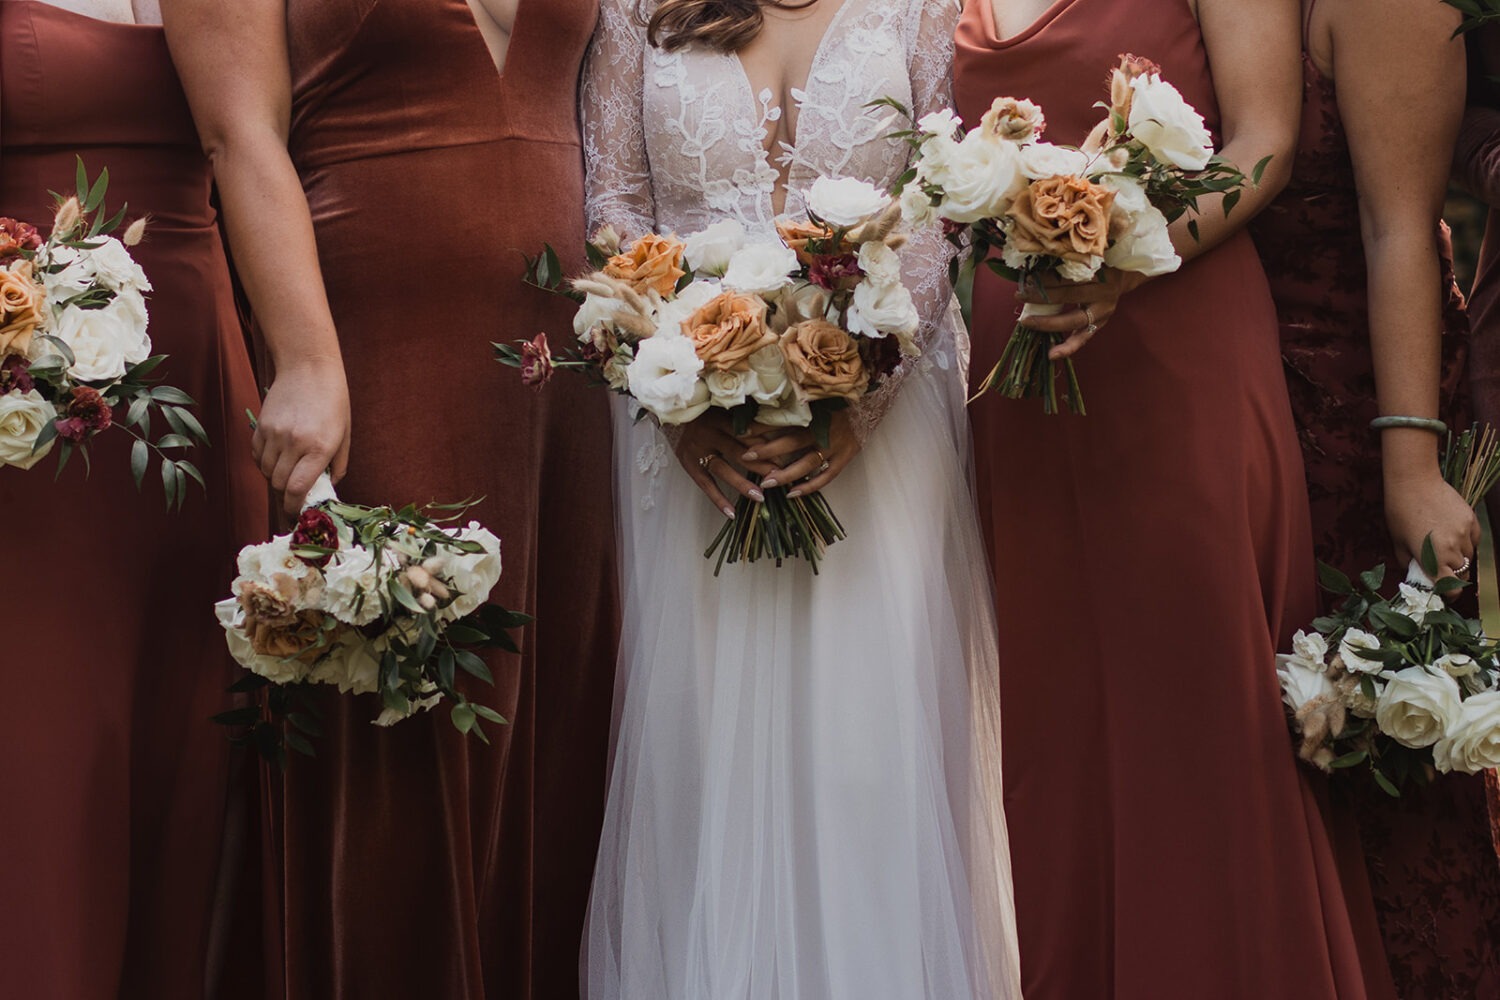 brides hold fall wedding bouquets at traditional Jewish wedding